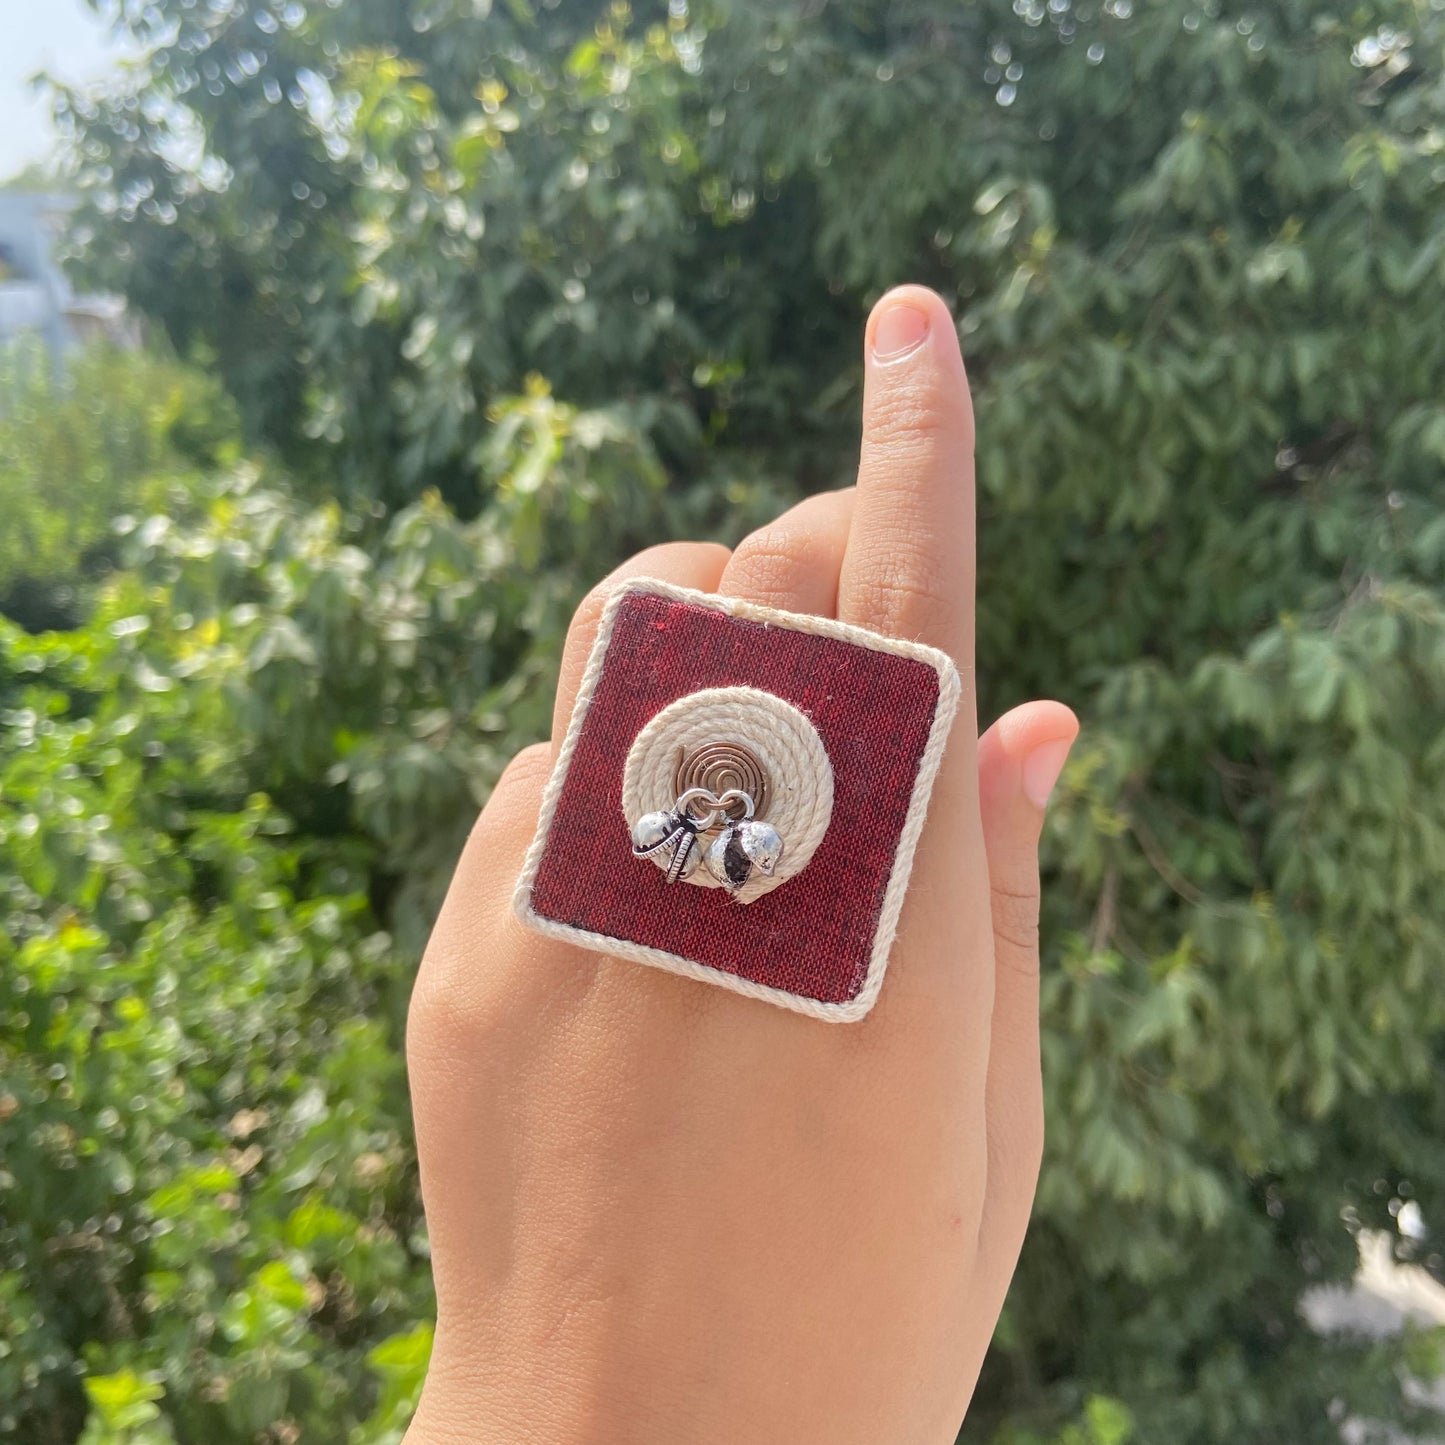 Chaukor Fabric Ring (Red)